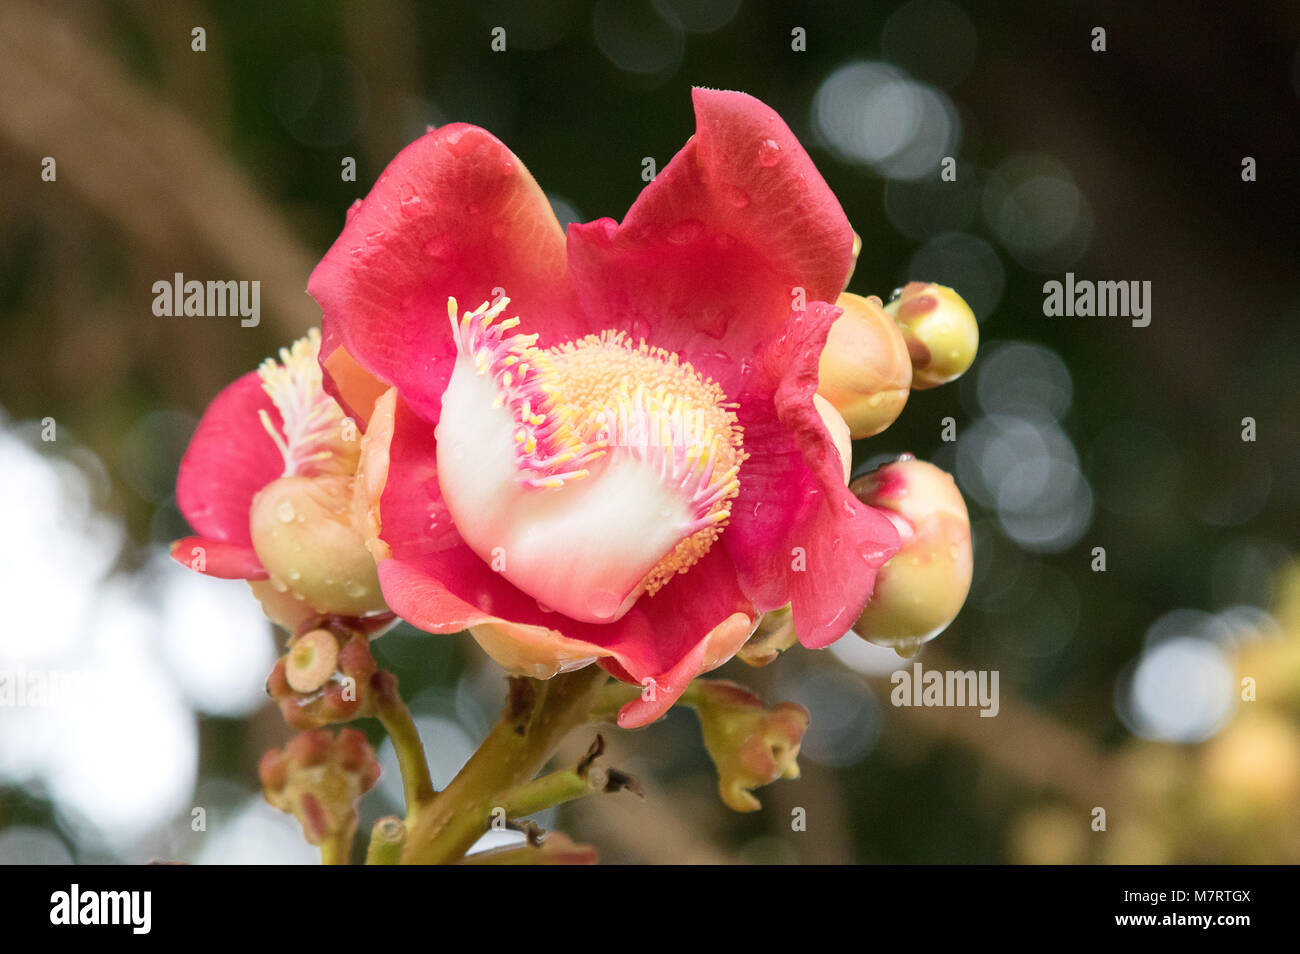 The red flower of Pentacme Siamensis, or Shorea Siamensis, also known as red meranti or Red lauan, Cambodia, Asia Stock Photo